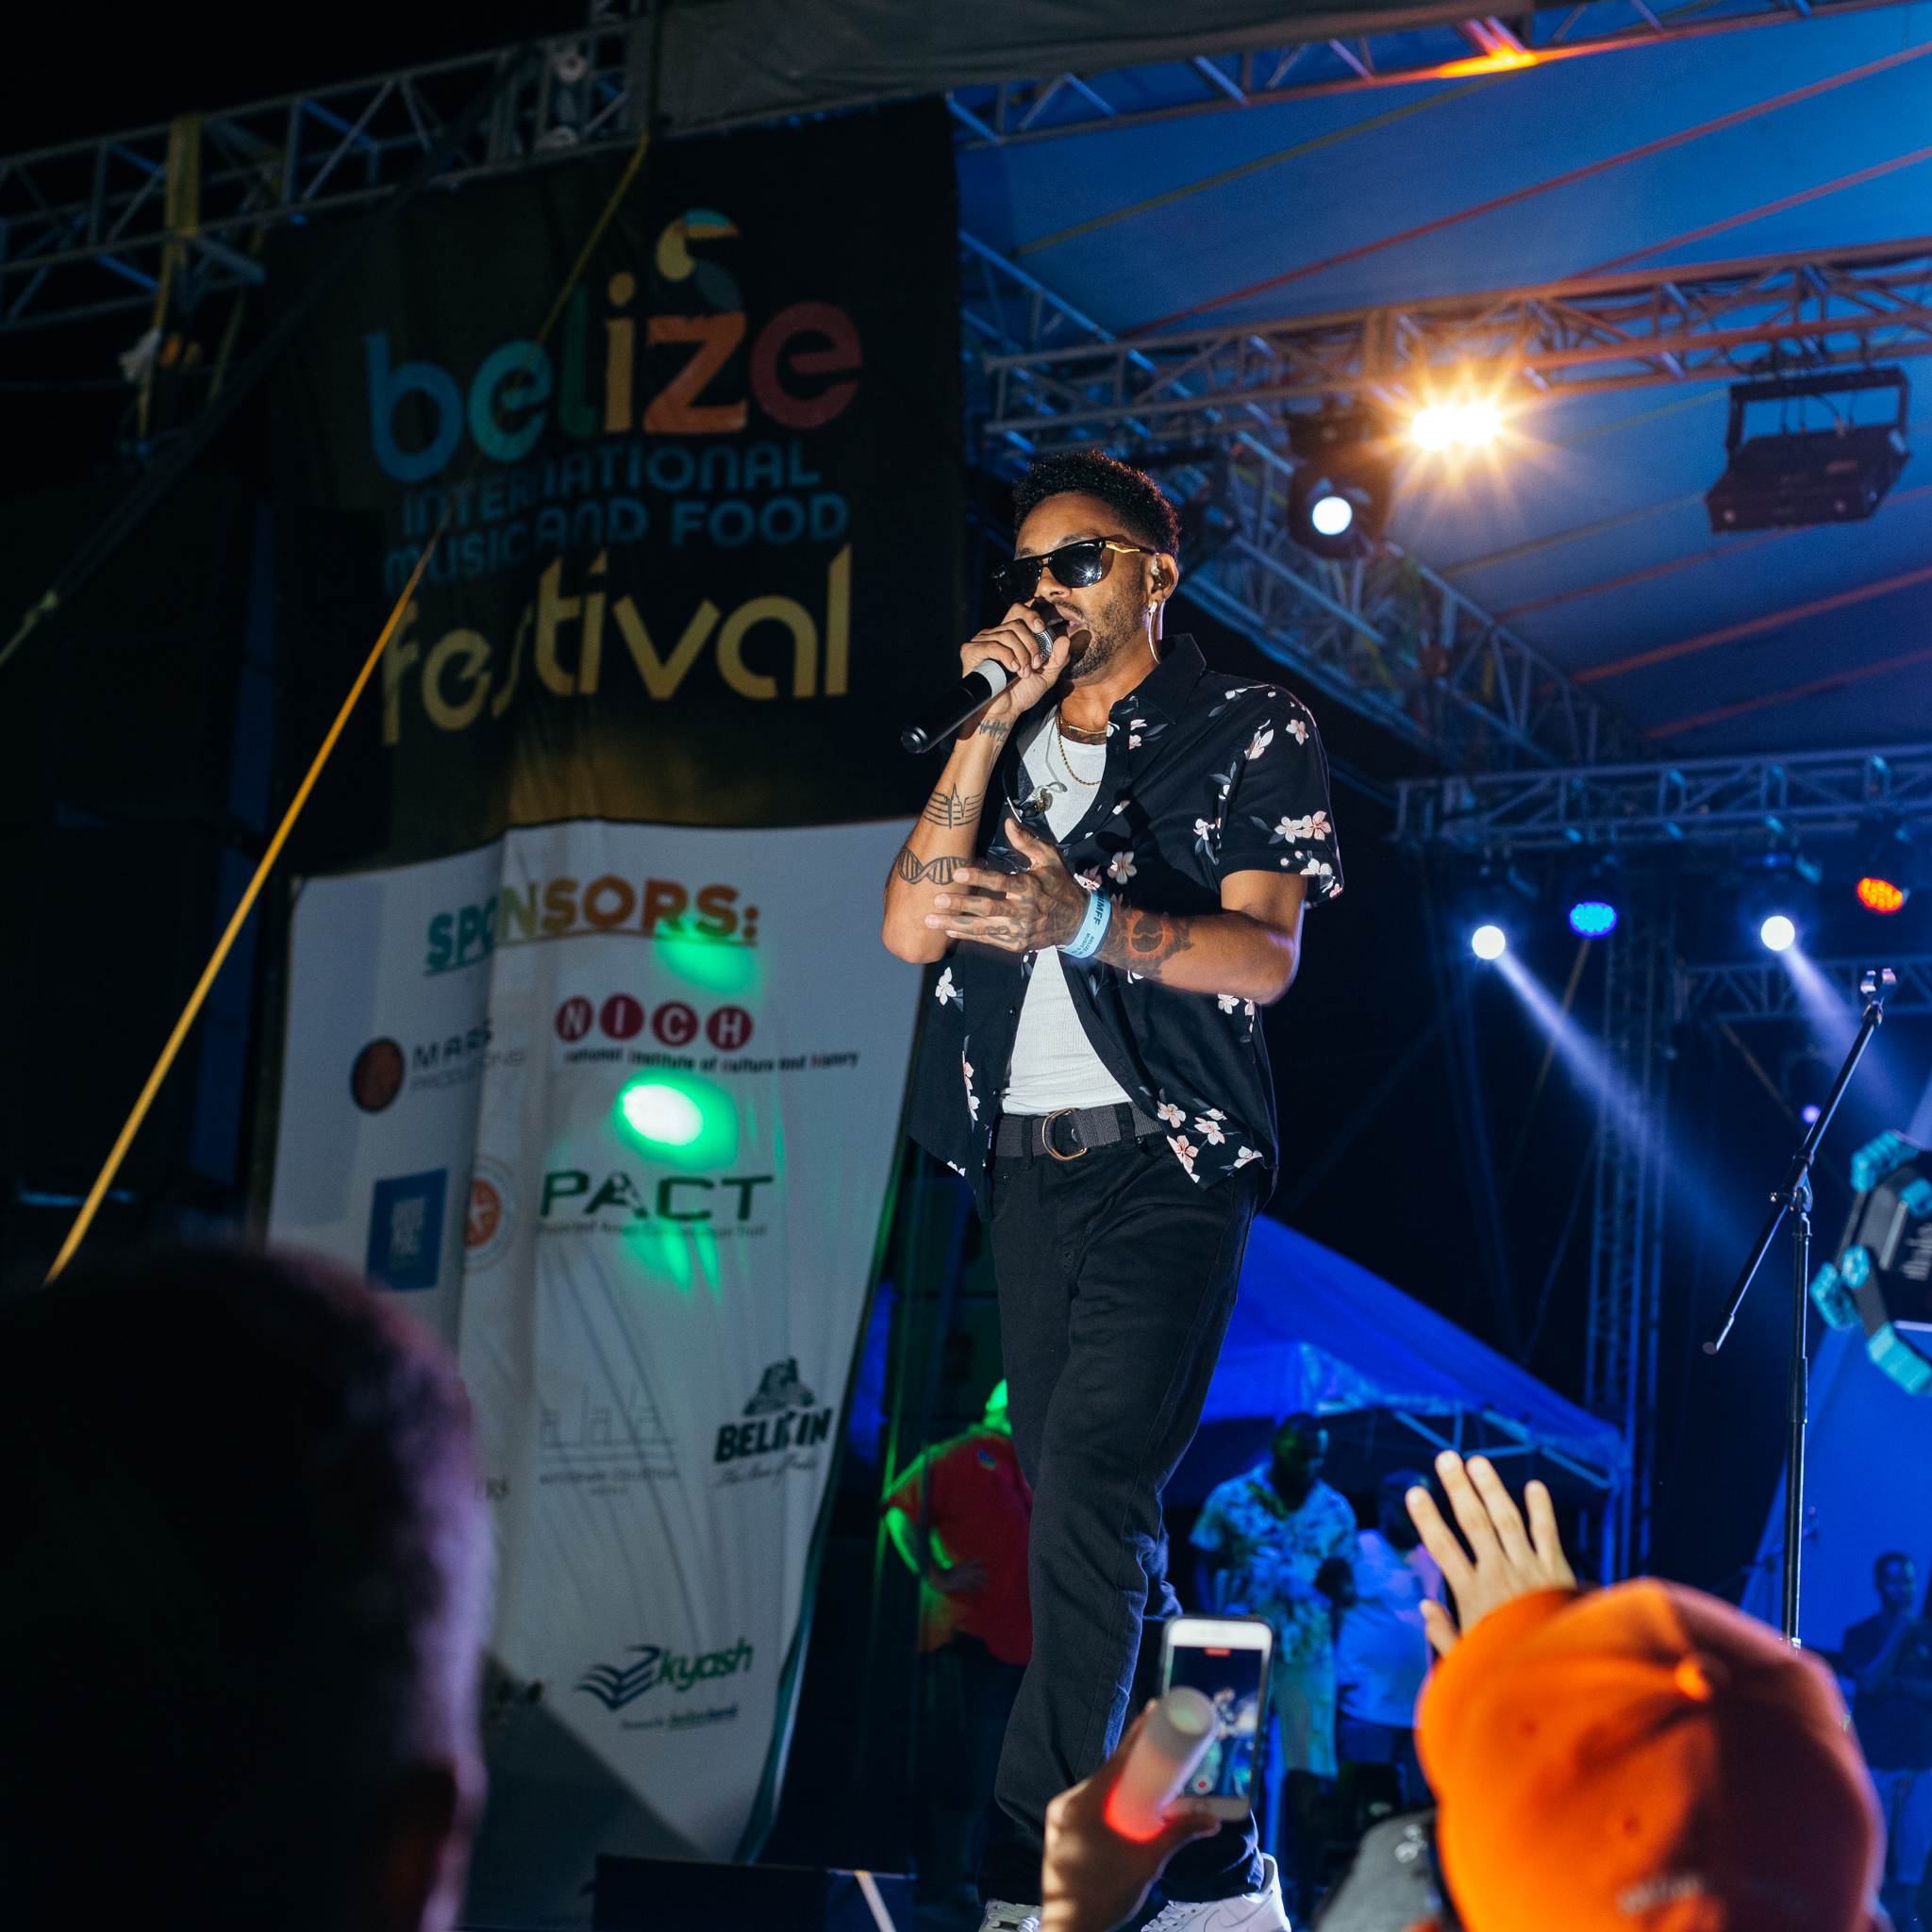 The Belize International Music and Food Festival